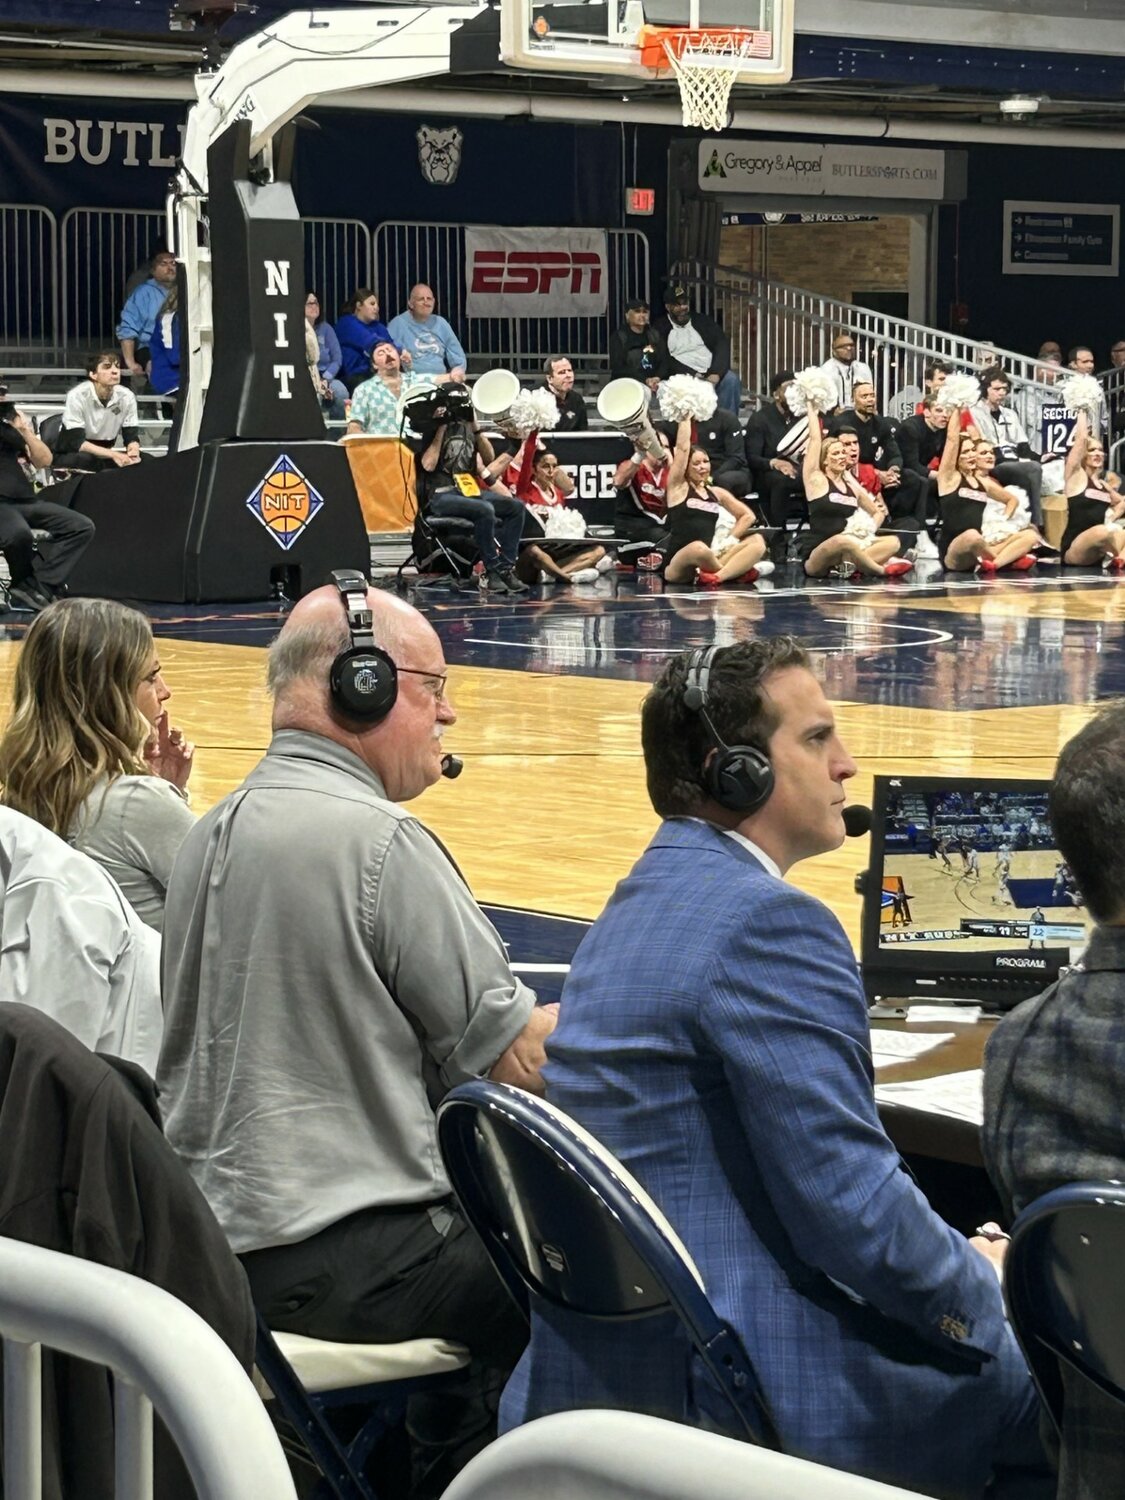 Montgomery County's own Jeff Nelson was on site assisting the ESPN crew with stats on Tuesday. Crawfordsville also had another connection with the game as Butler Bulldog PA announcer Dave Peach was working the game.